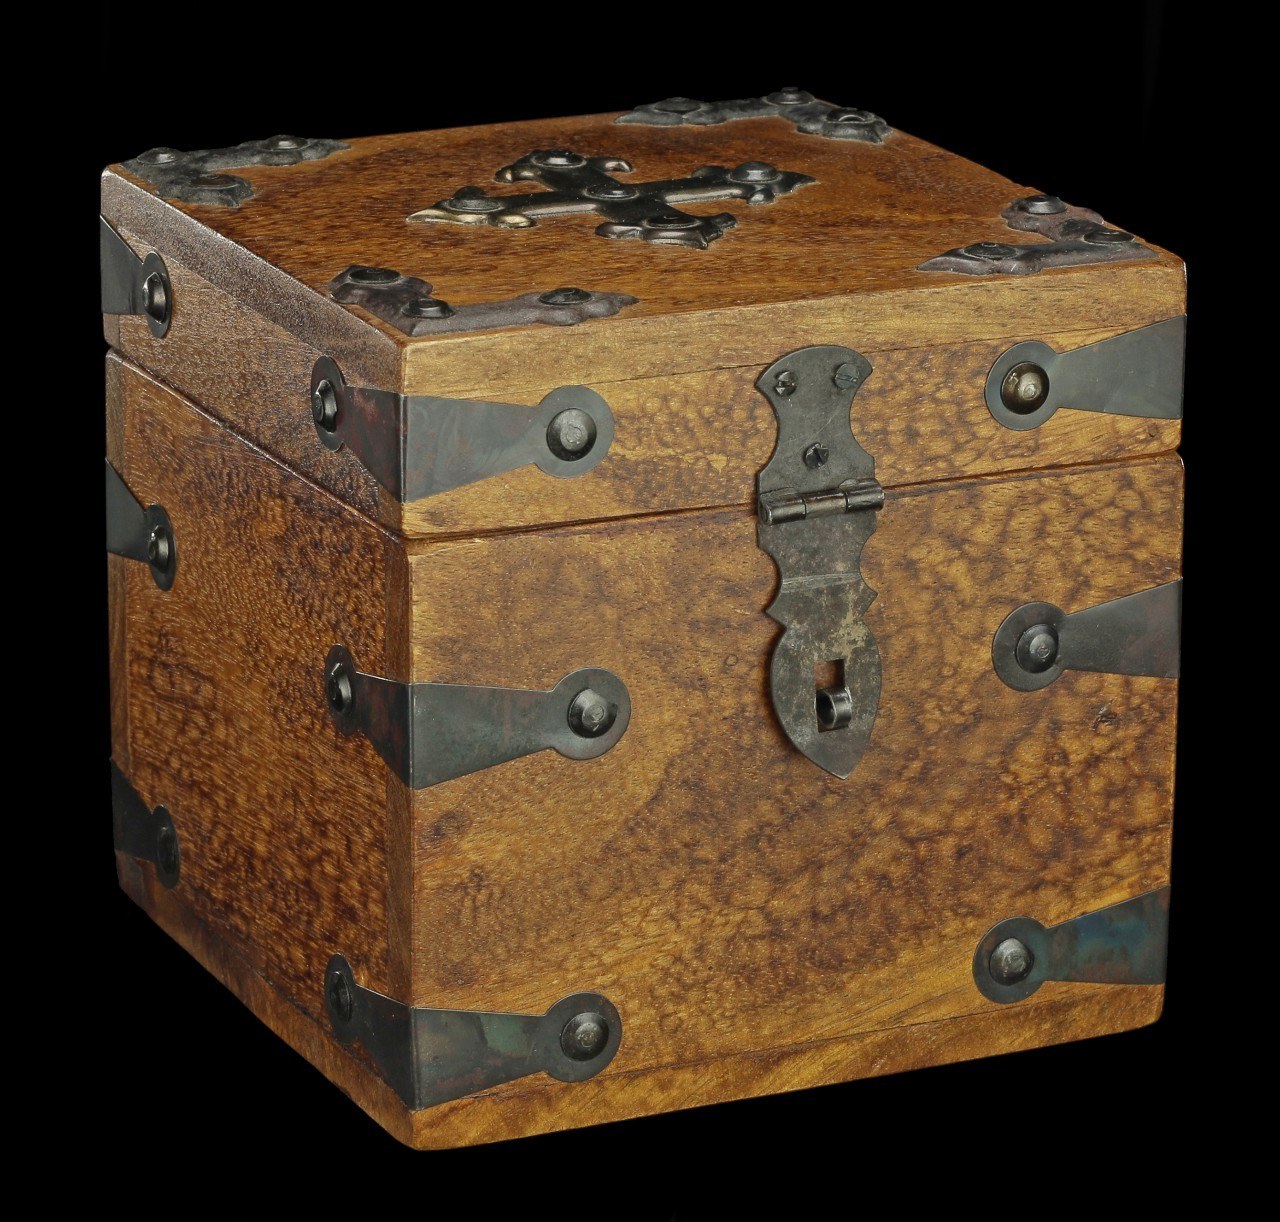 Medieval Wooden Chest - in Cube Shape